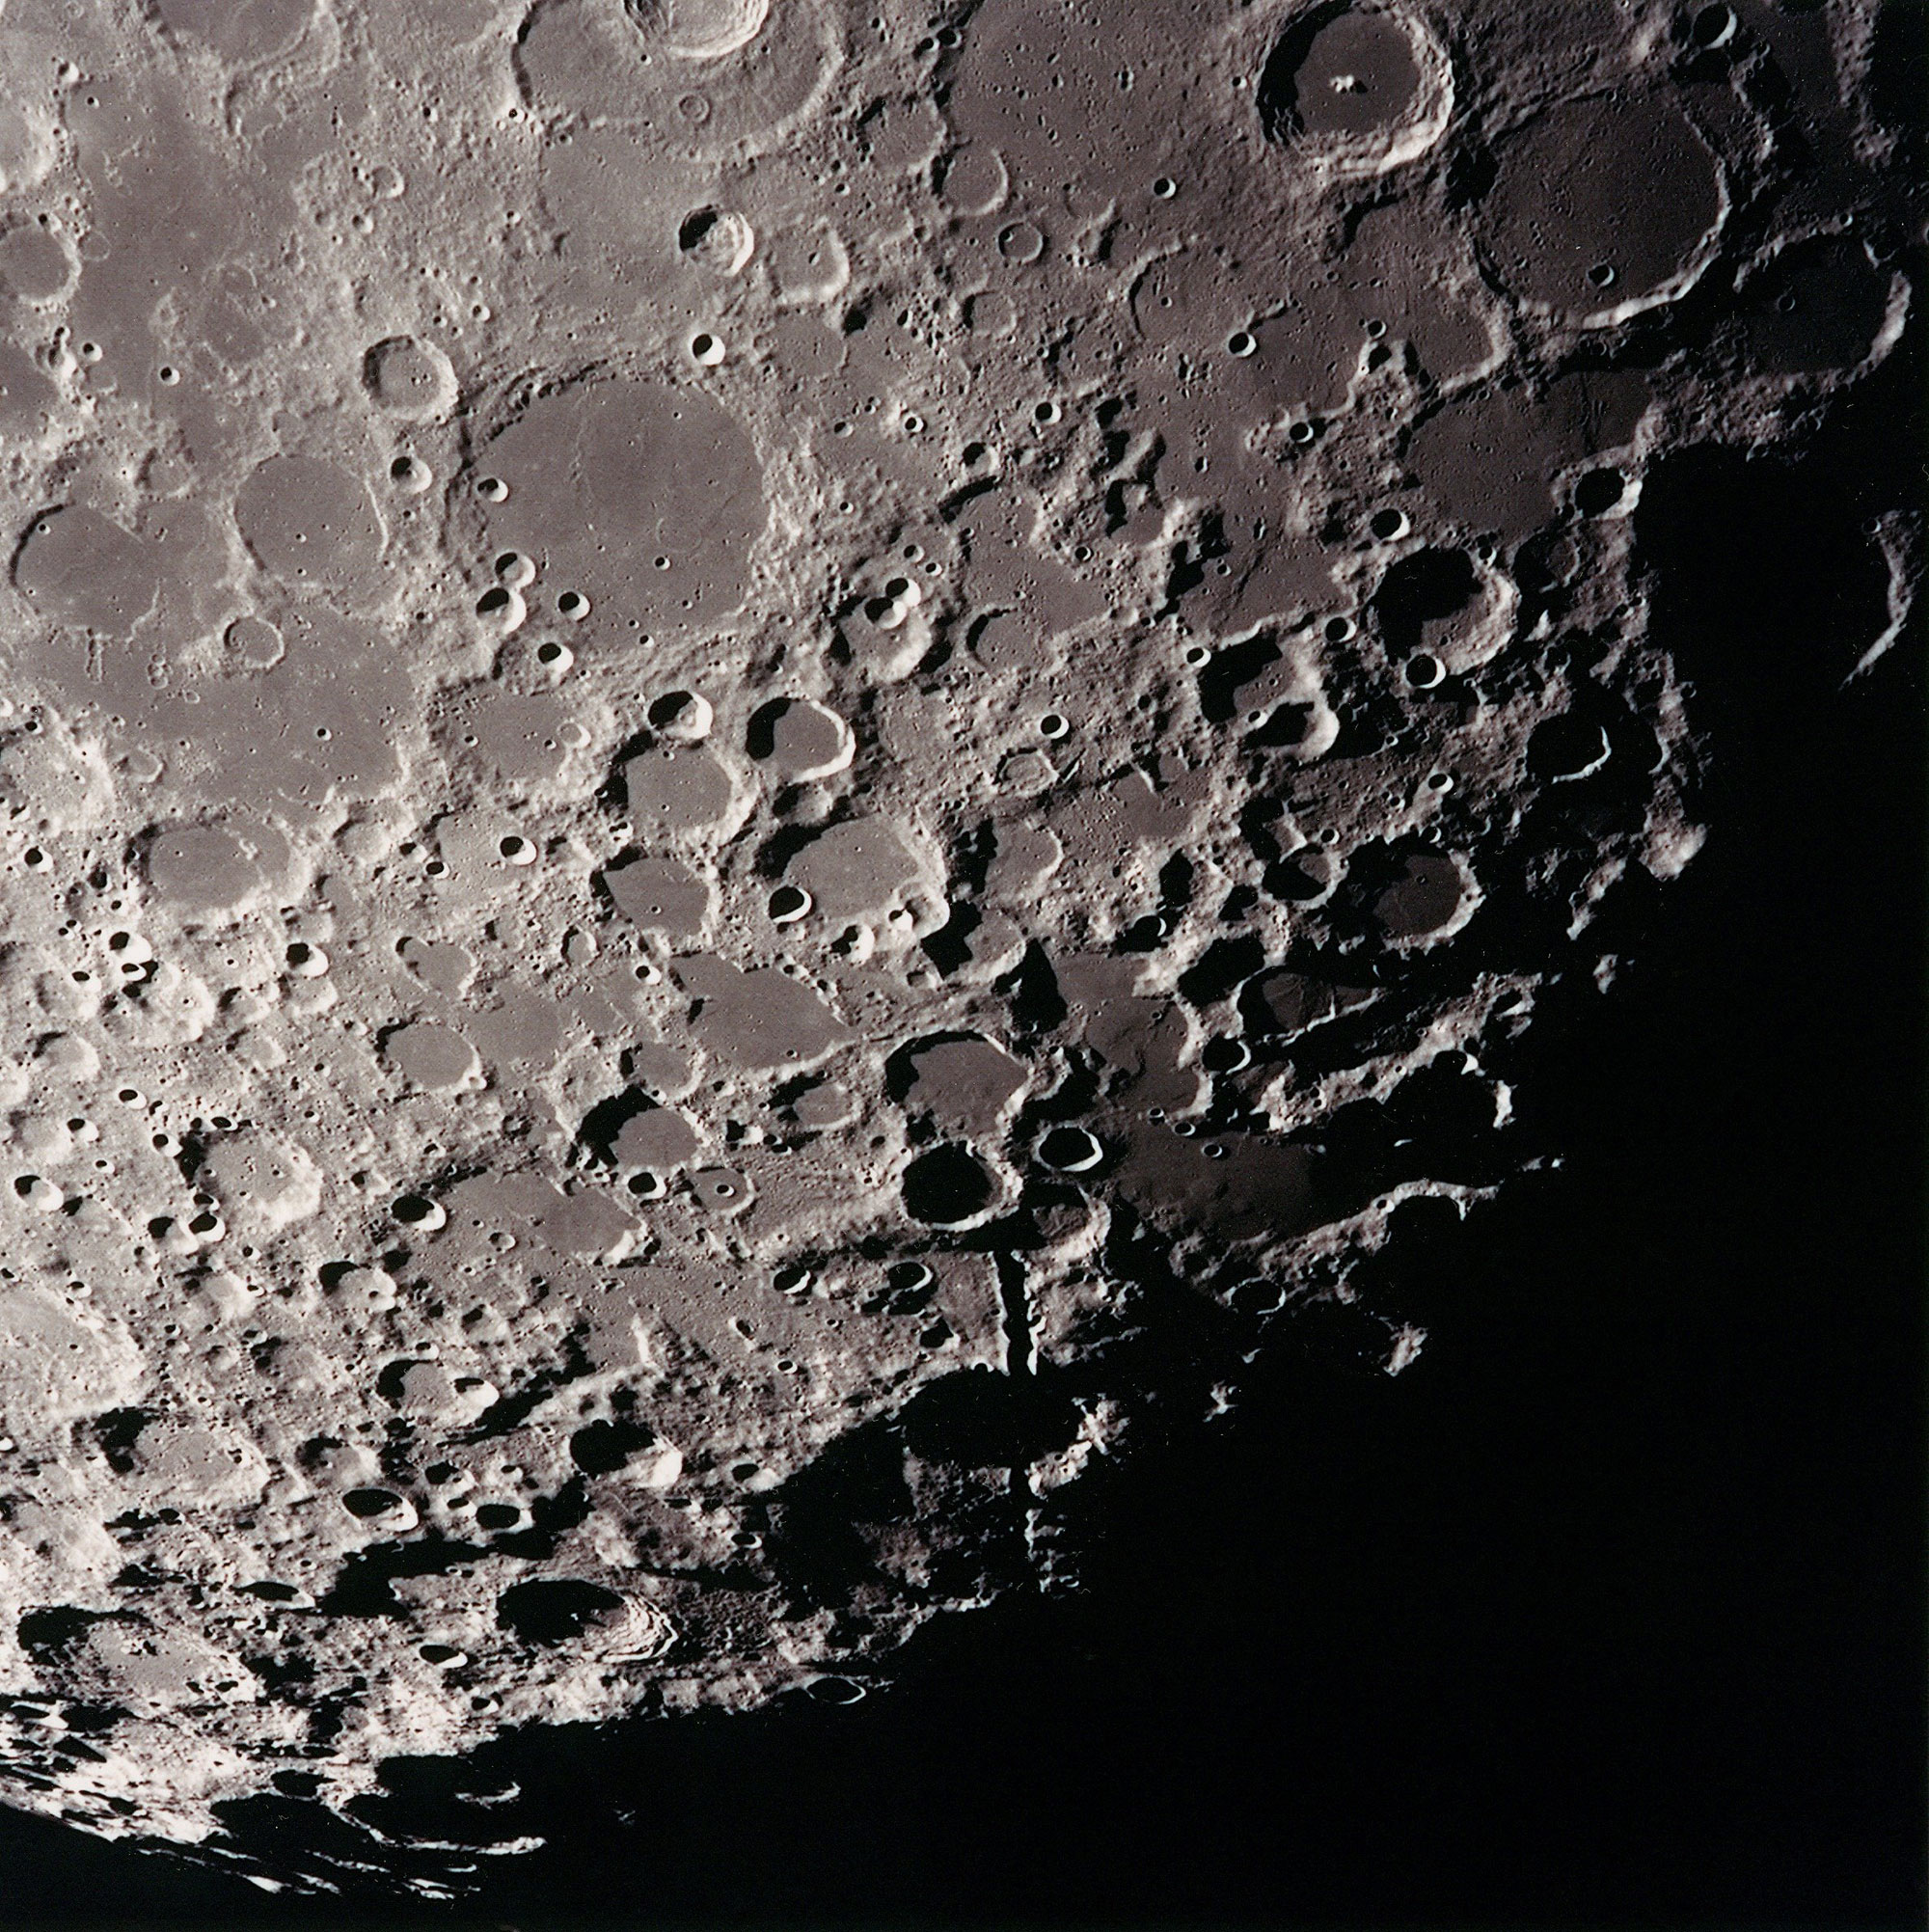 View from lunar orbit looking towards the Moon’s South pole. Credit: NASA via Retro Space Images